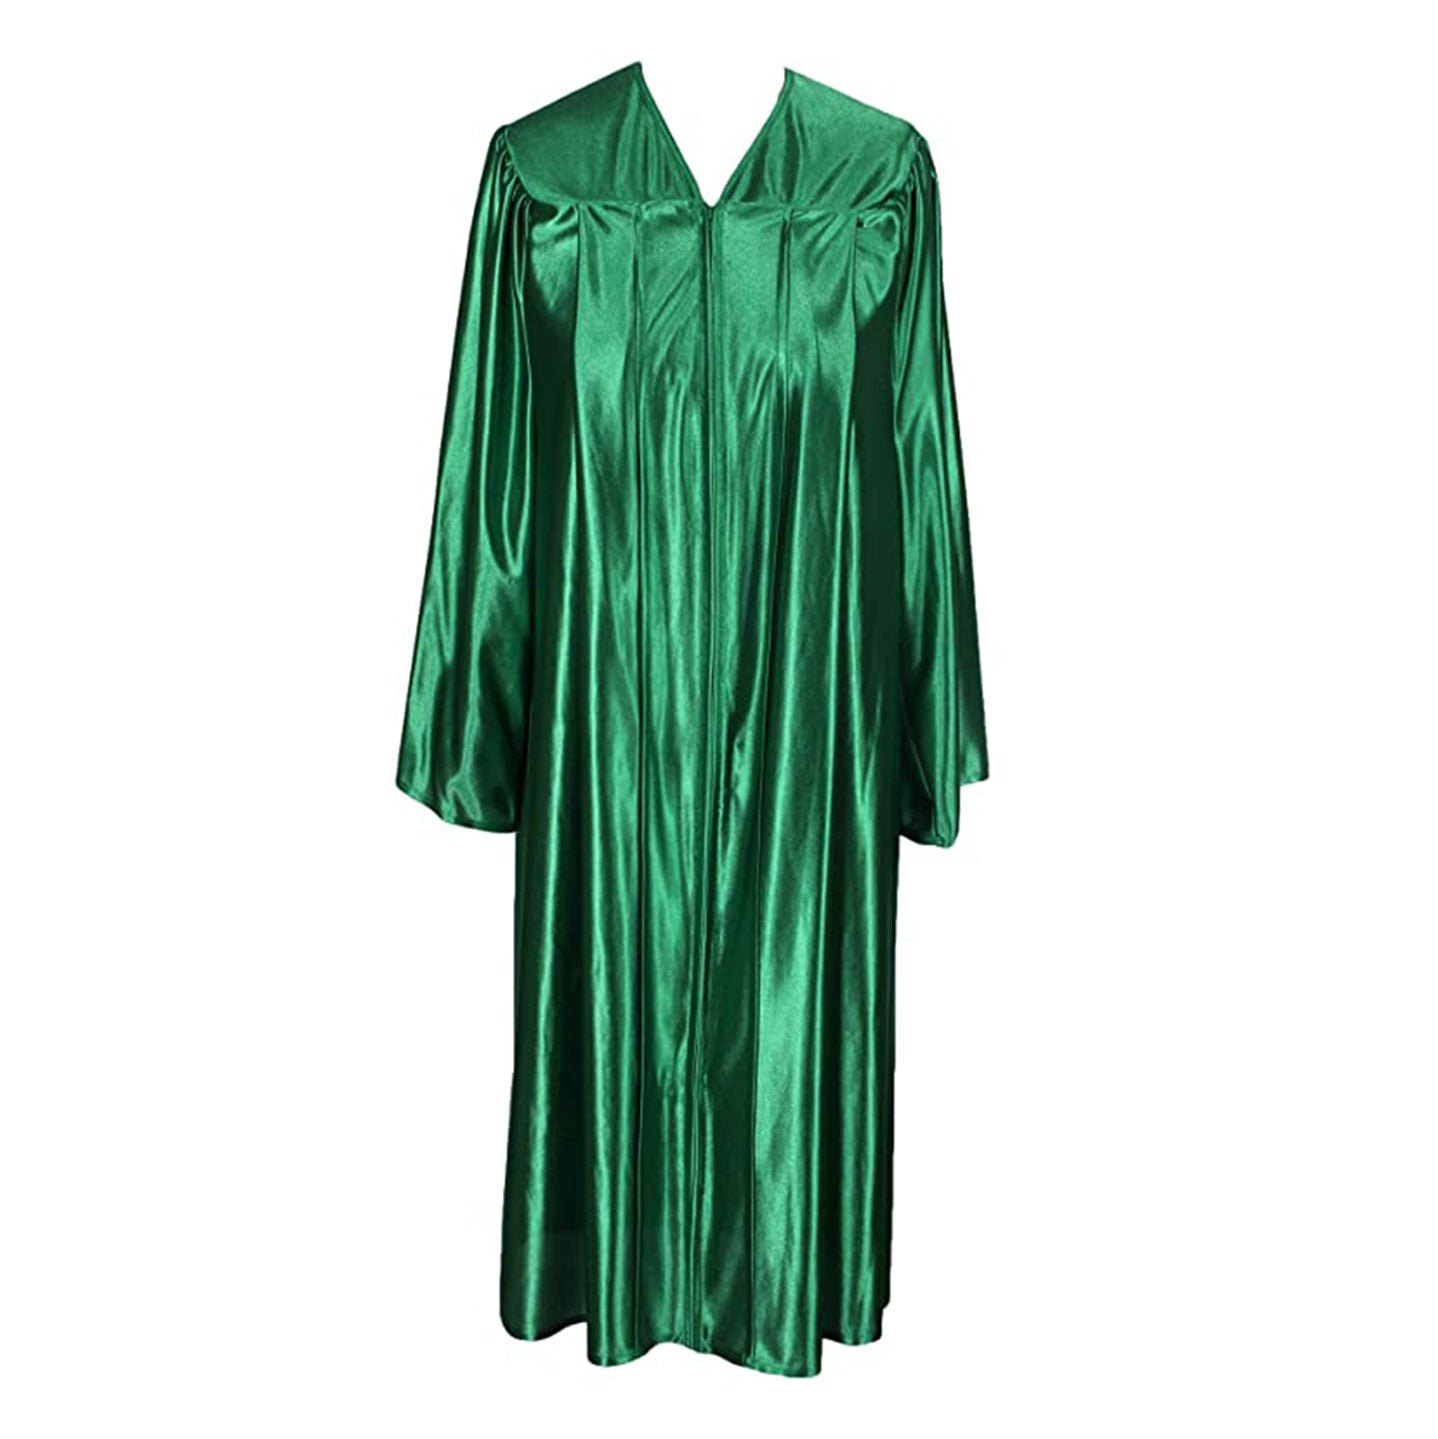 What to Wear Under the Graduation Gown? – Cap and Gown Direct